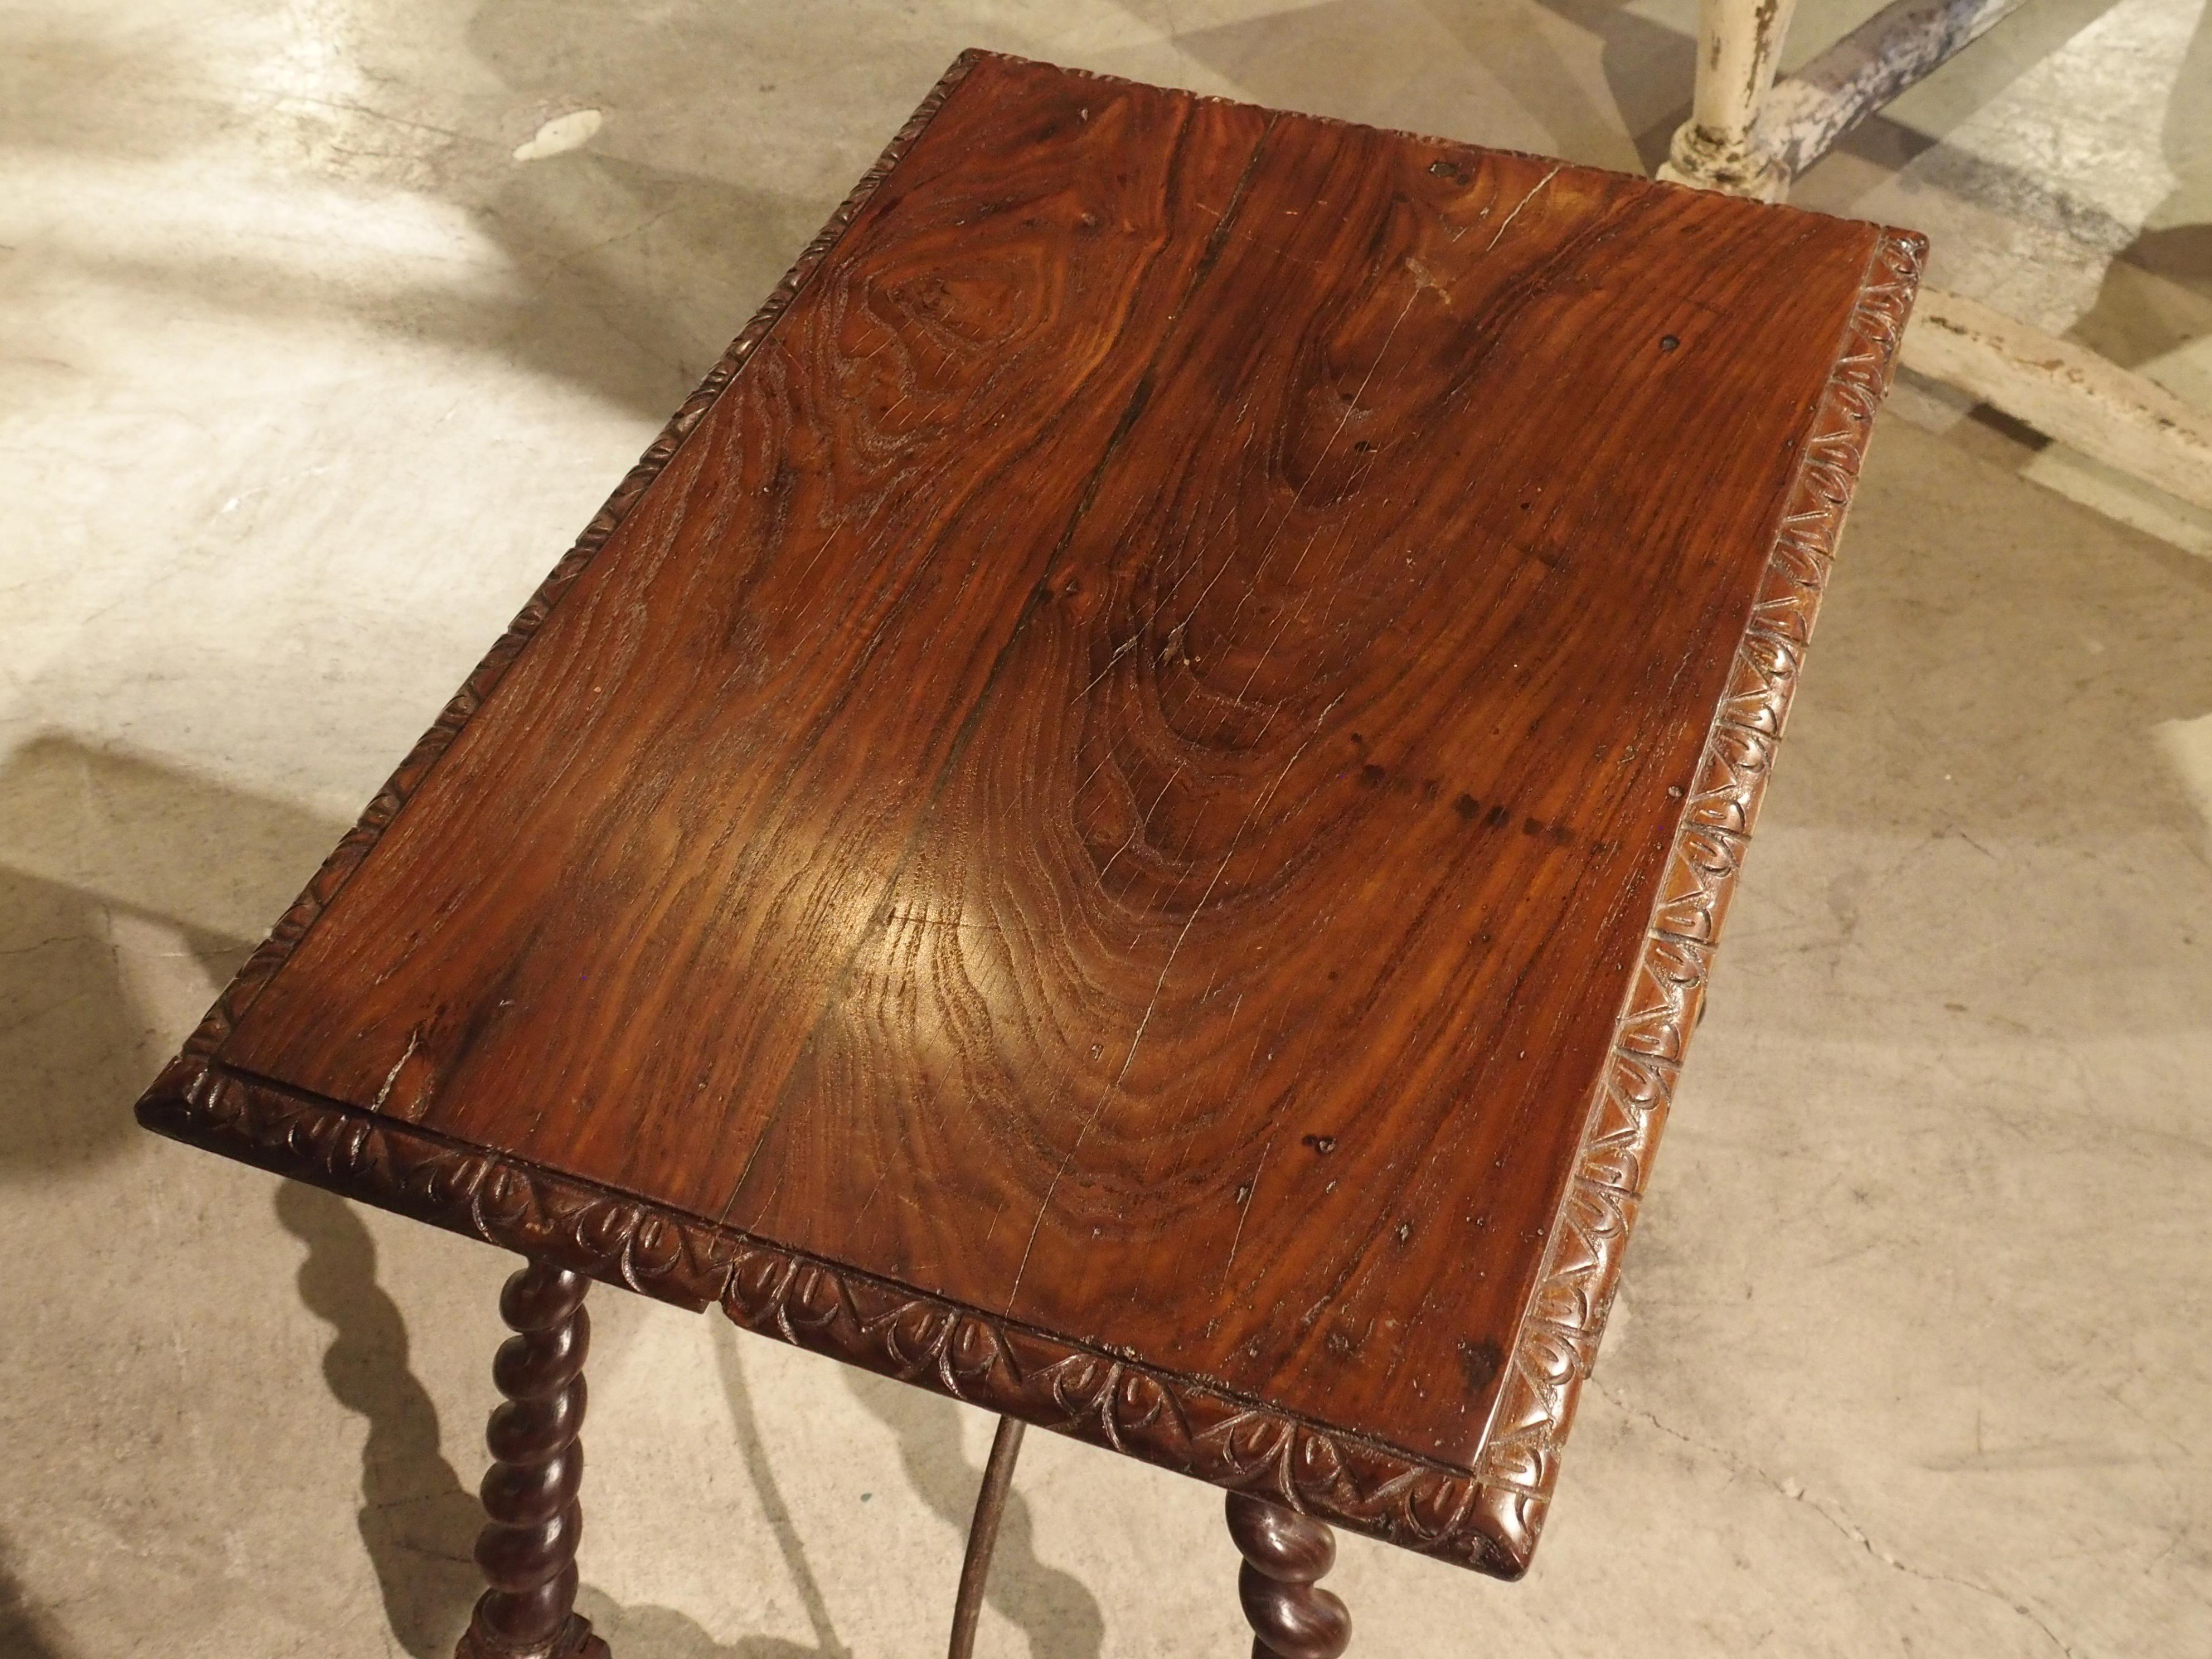 Hand-Carved Small Antique Iberian Oak Side Table, Early 20th Century